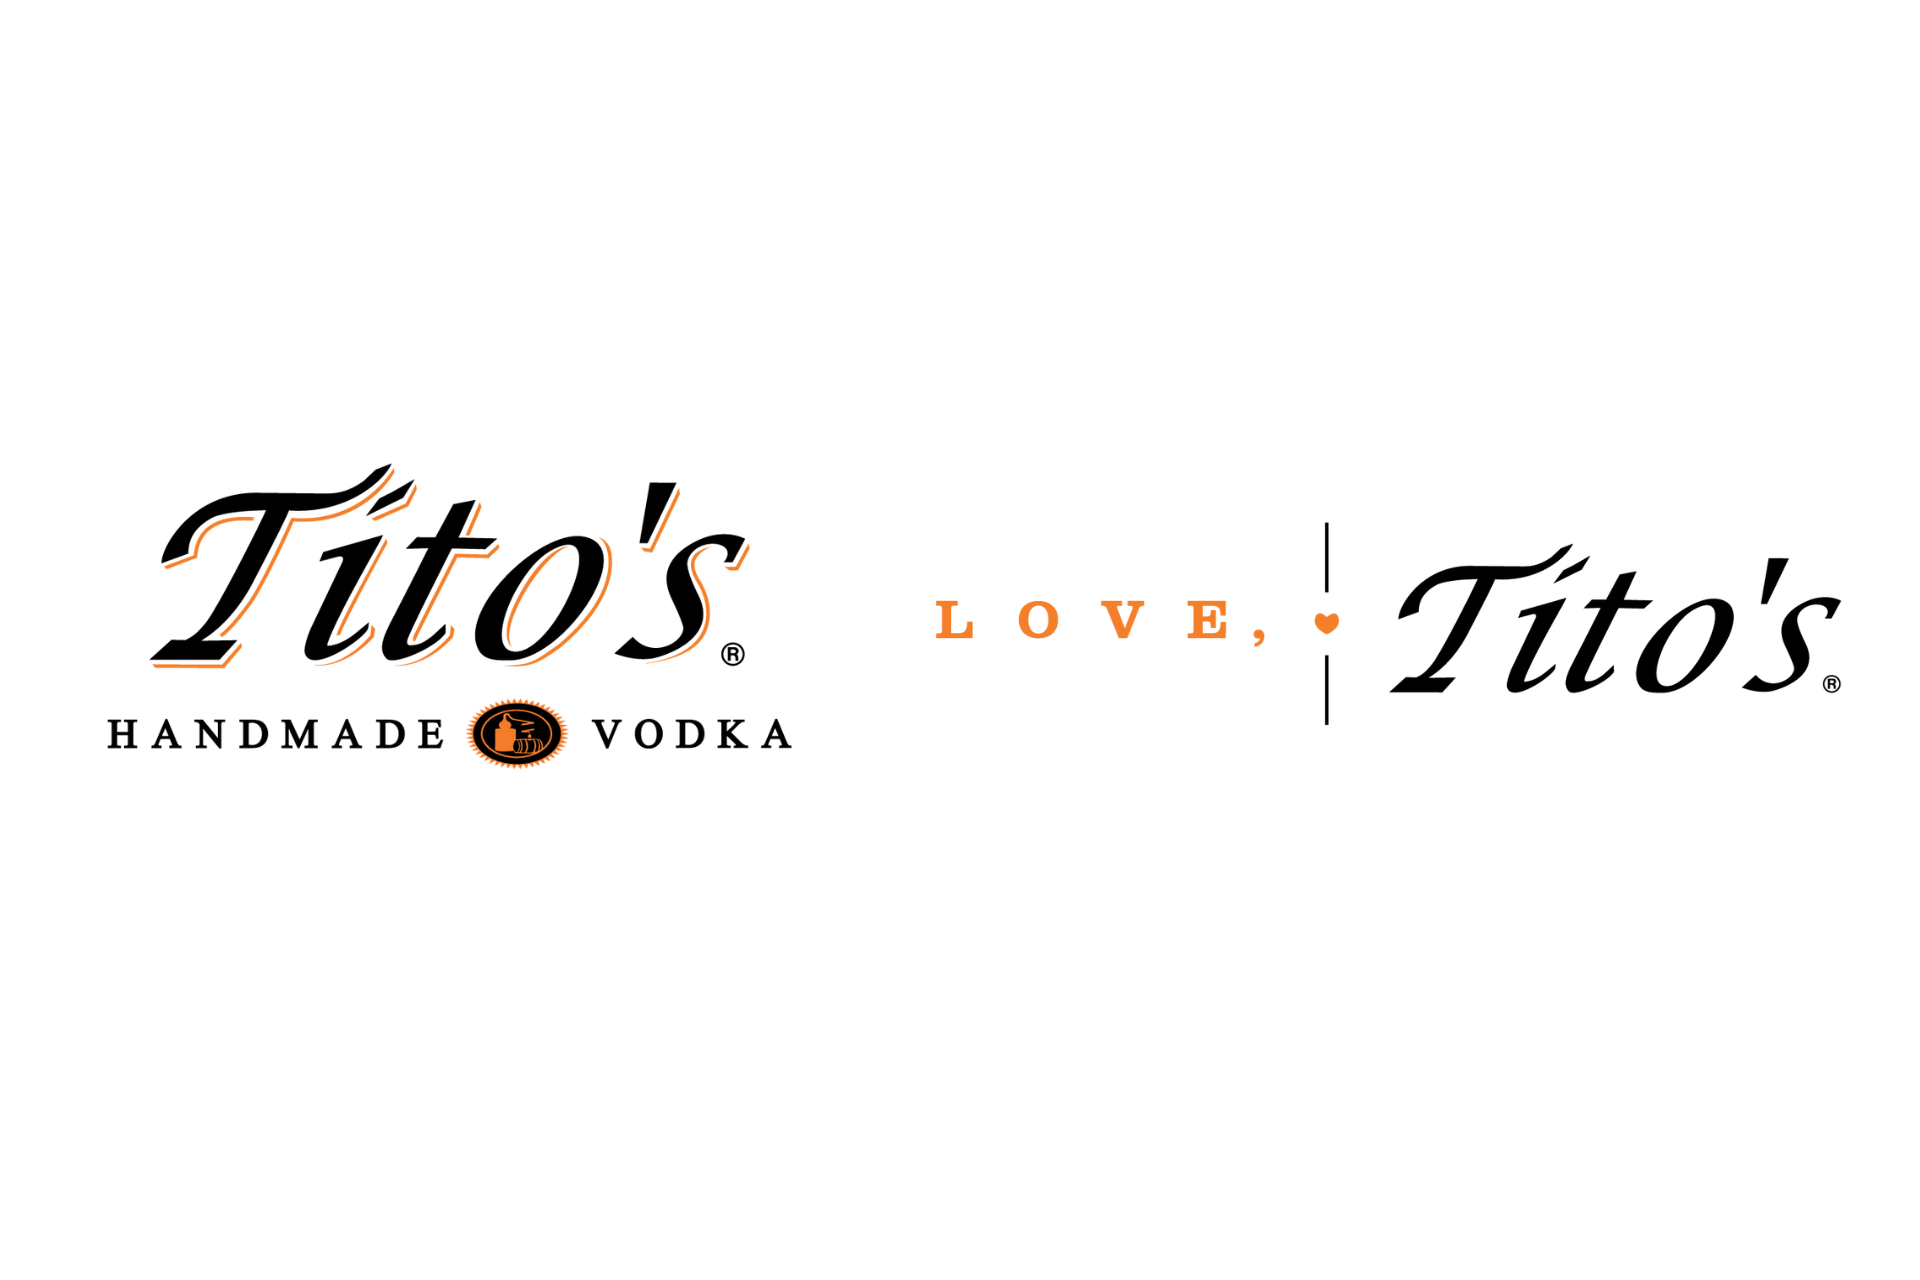 Empowering Black Futures: Goodie Nation Receives $50,000 Sponsorship from Tito’s Handmade Vodka as part of the Love, Tito’s Initiative